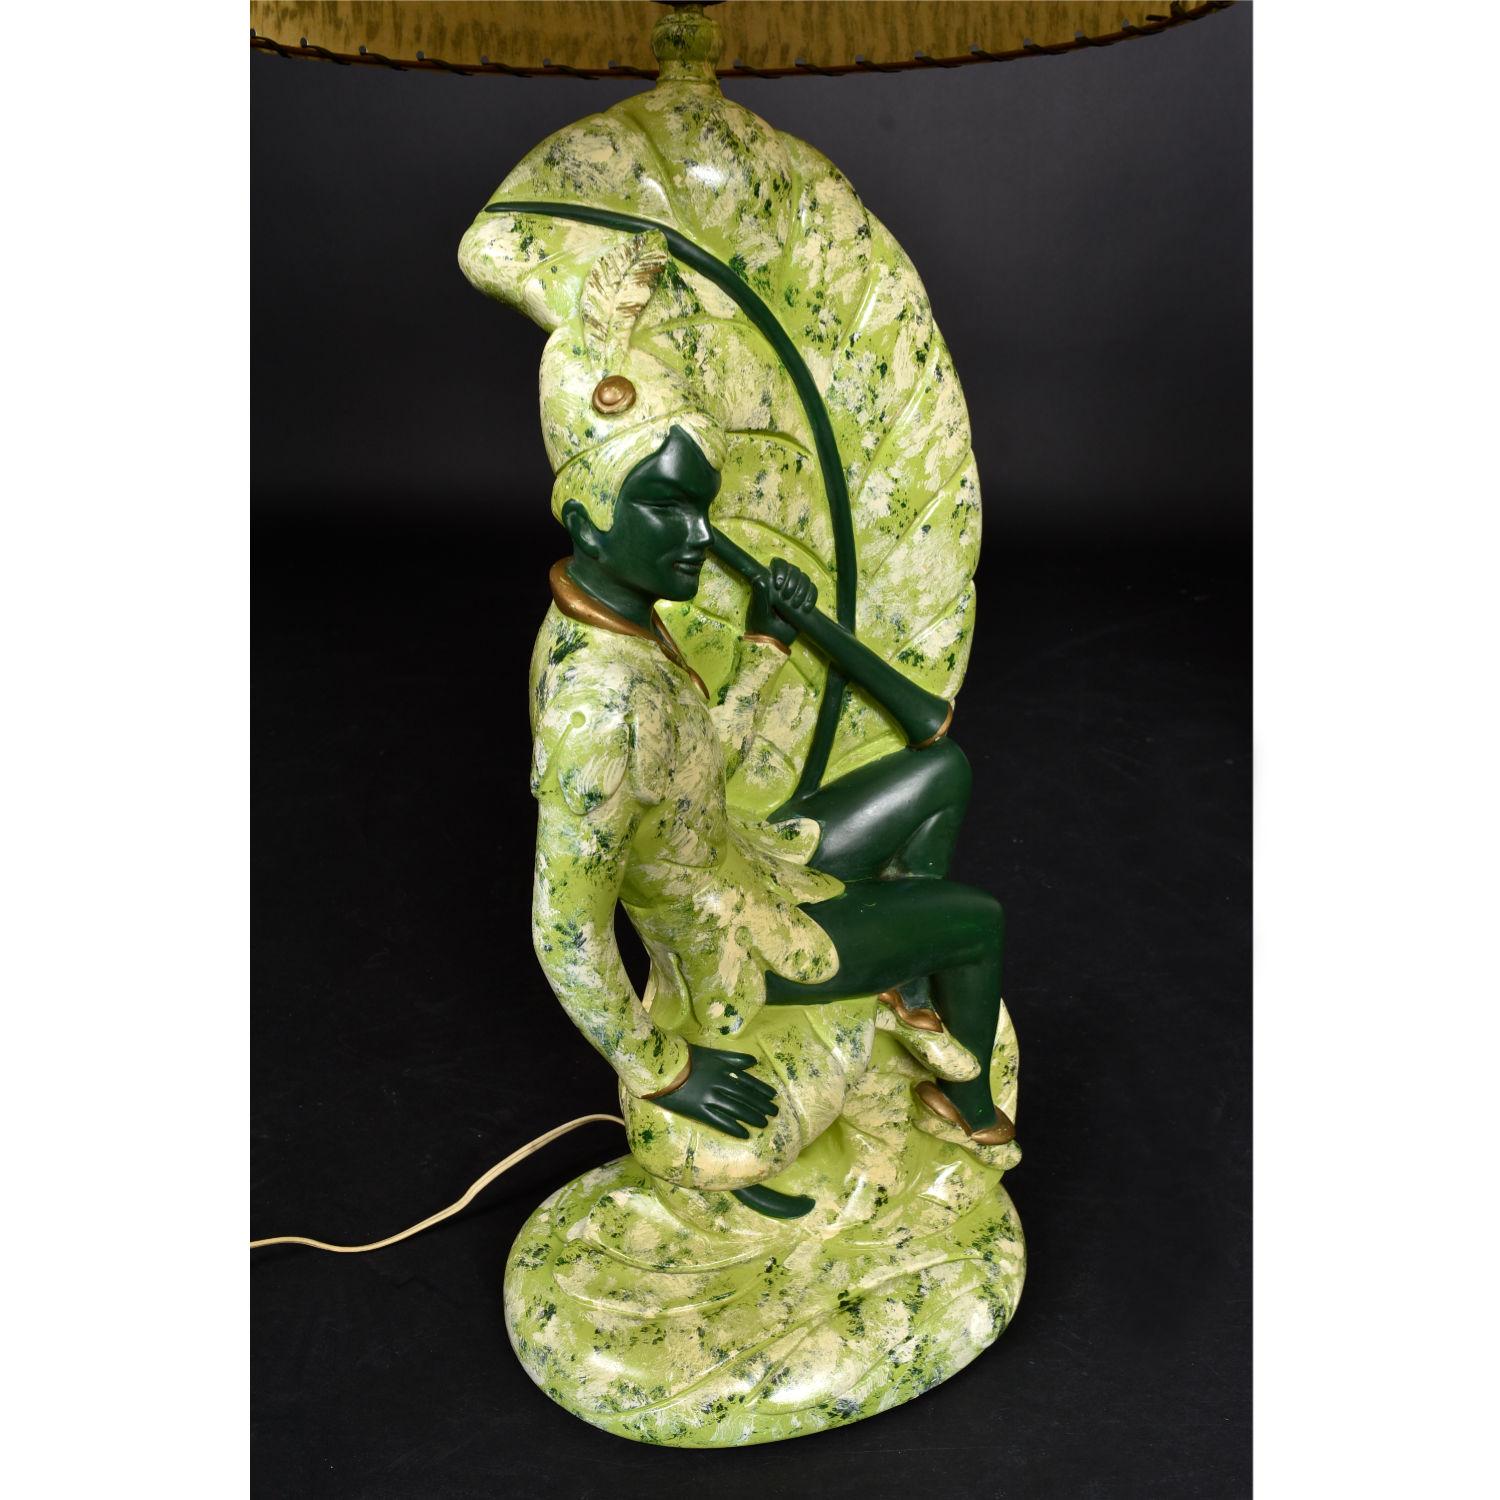 American Continental Art Co. Green Fairy Chalkware Lamps with Fiberglass Shades For Sale